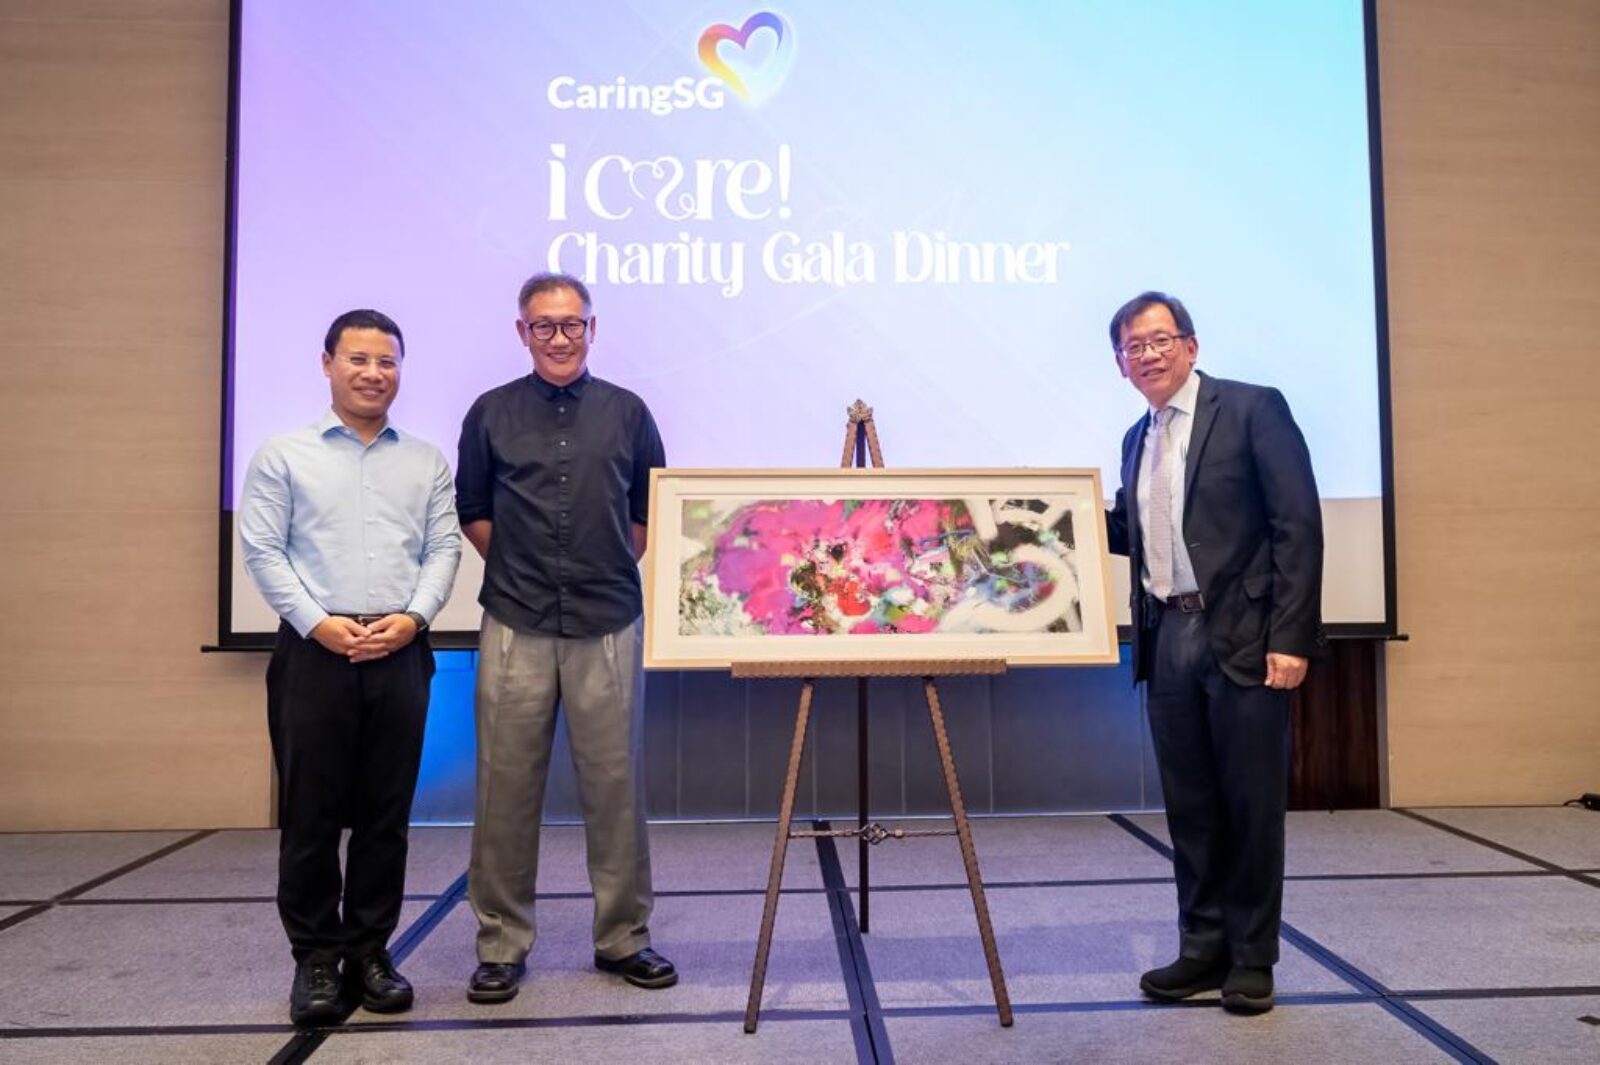 CaringSG’s First i care! Charity Gala Dinner on 25 March 2023